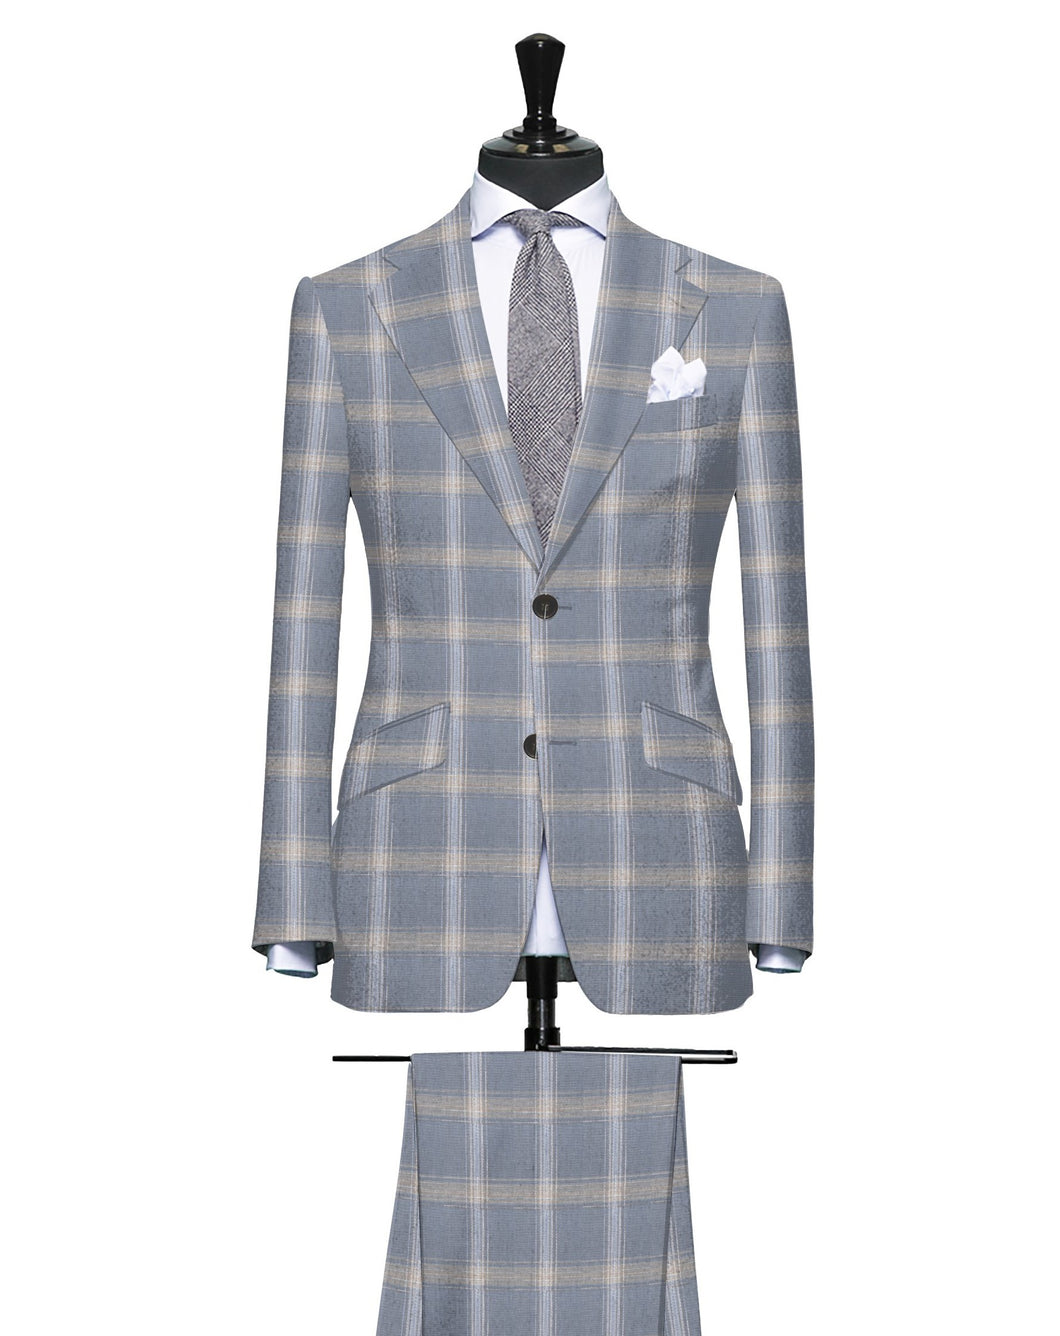 Grey with Tan and Light Blue Large Plaid Pattern, Super 140, Wool